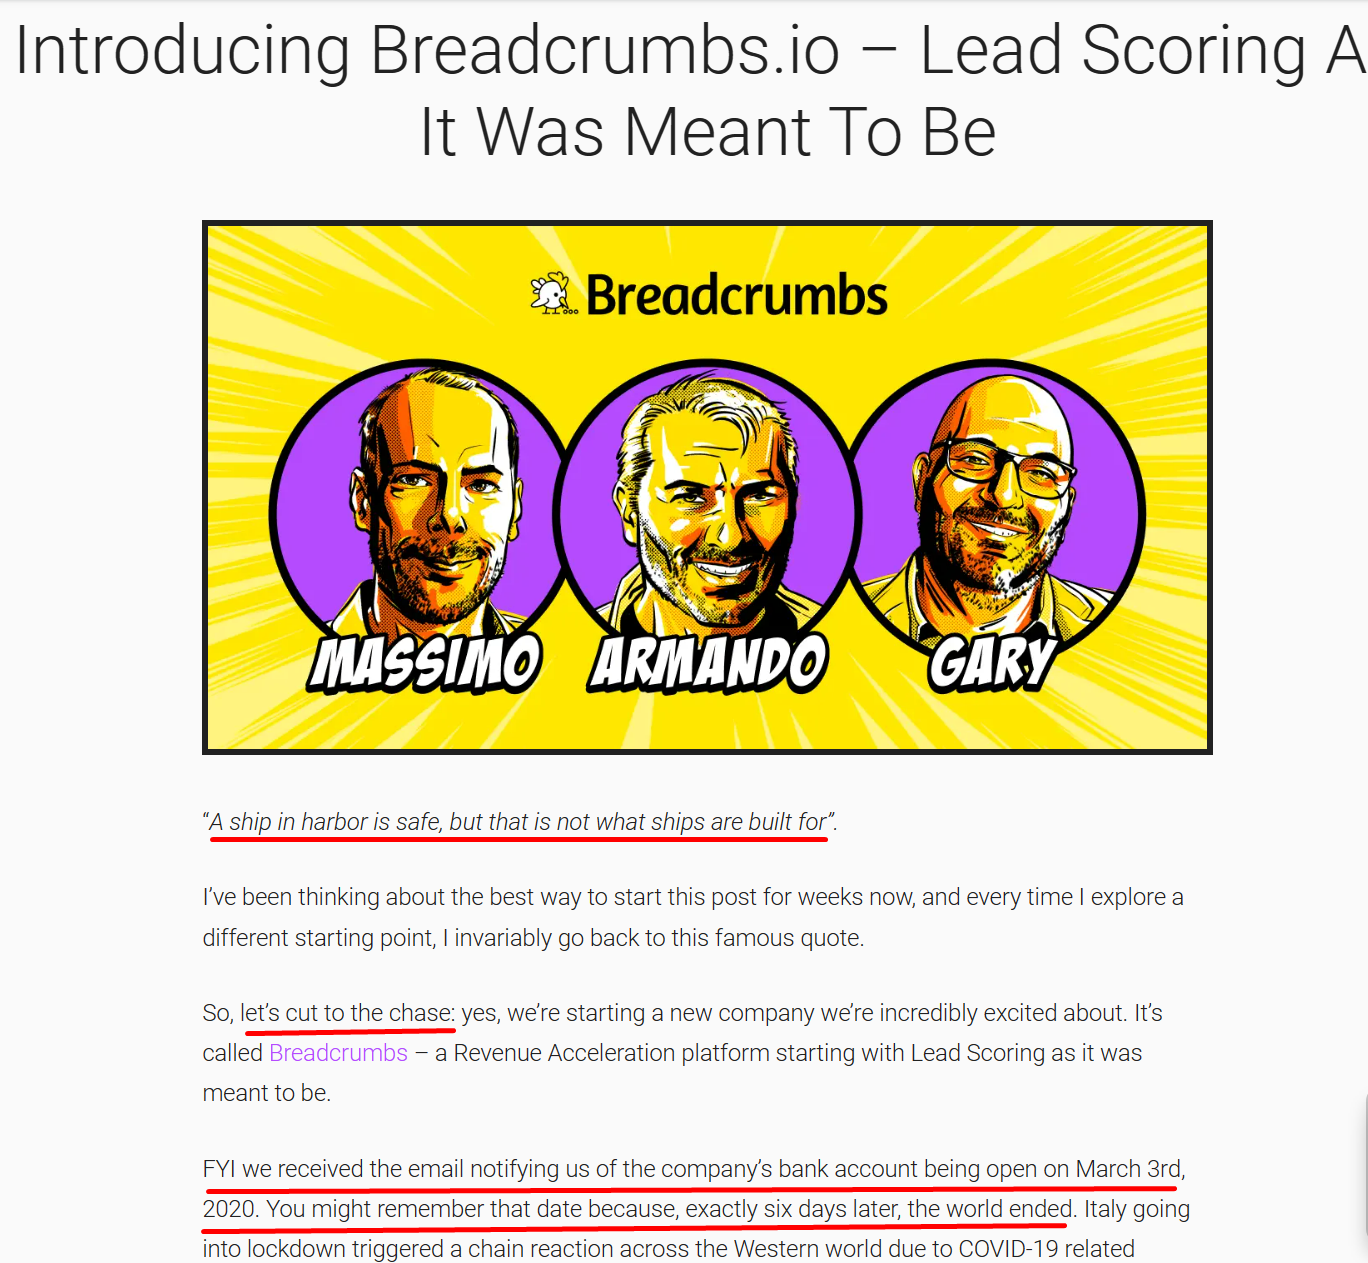 Breadcrumbs' About Us page